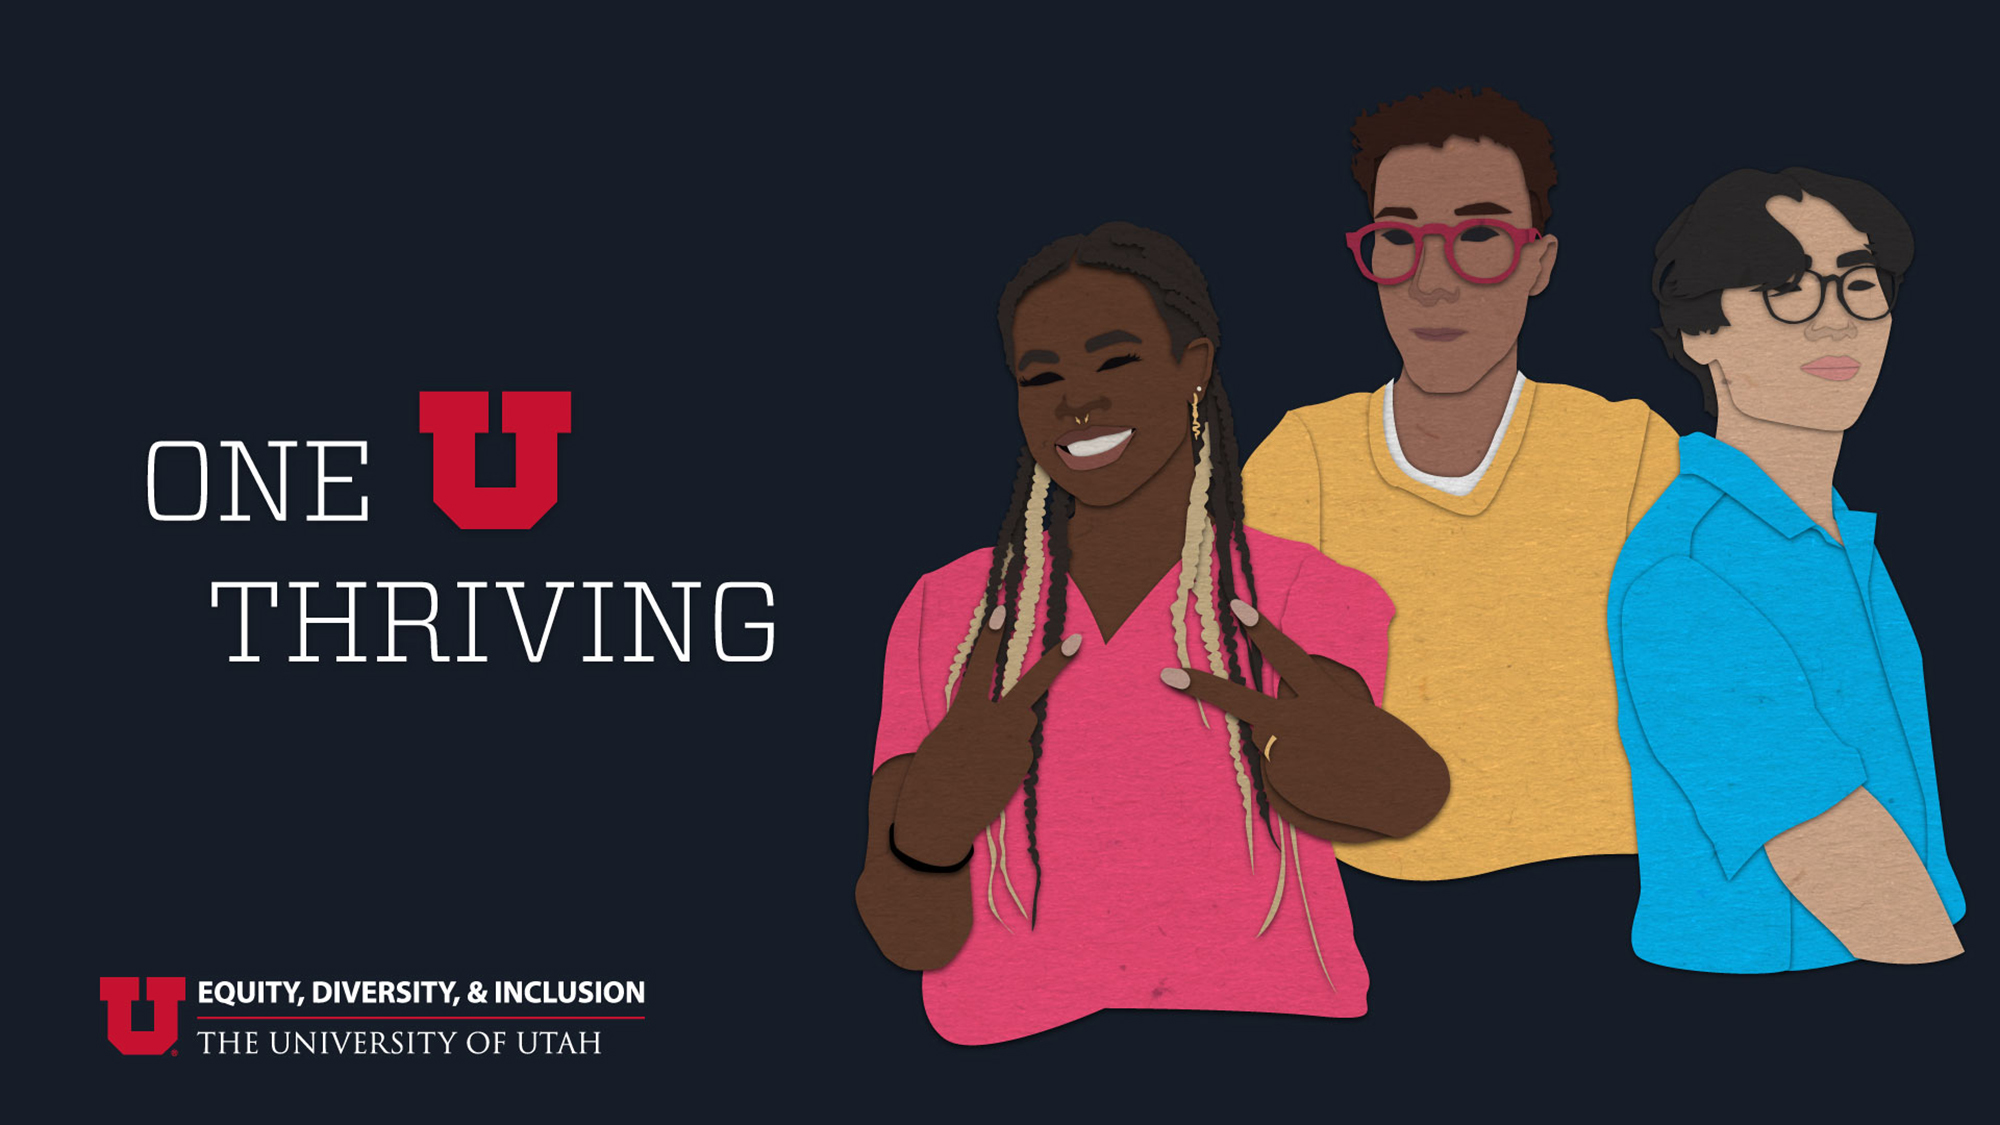 graphic shows animated images of the three Operation SUCCESS fellows on the right, and the One U thriving logo on the left. The Equity, Diversity, and Inclusion logo is under the One U thriving logo in the bottom left corner.